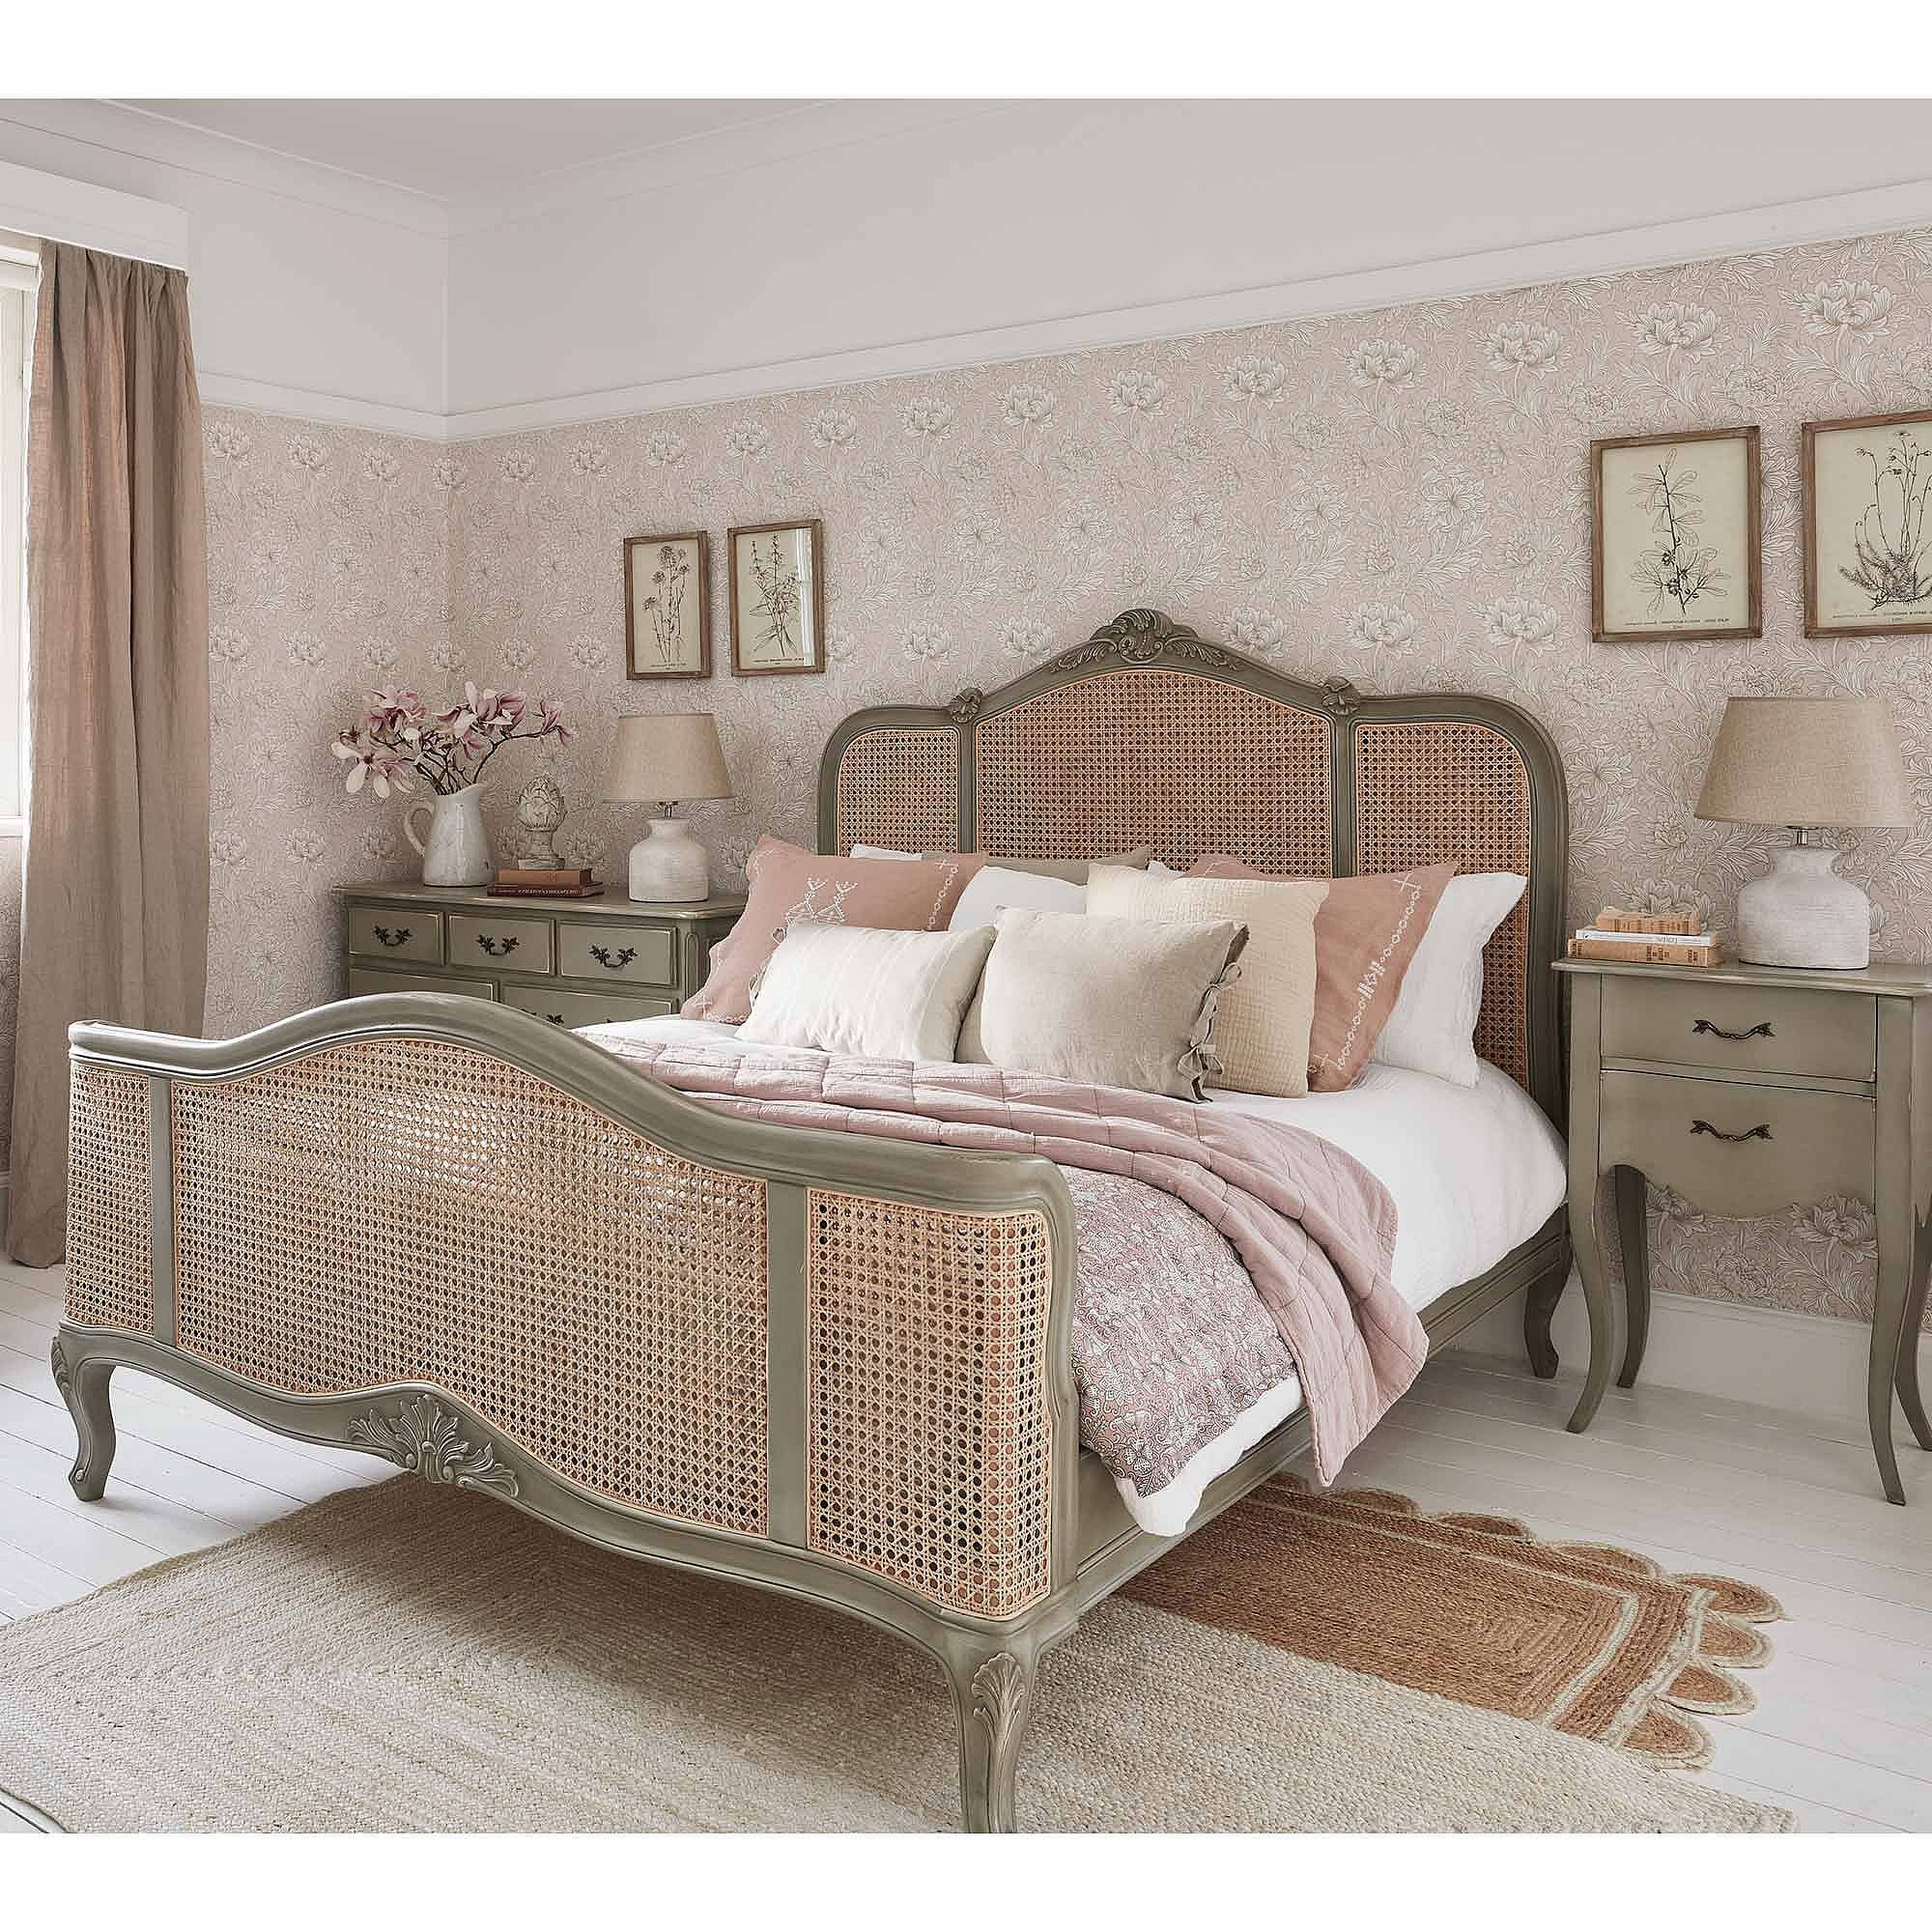 Normandy Rattan Painted Luxury French Bed (King) - image 1